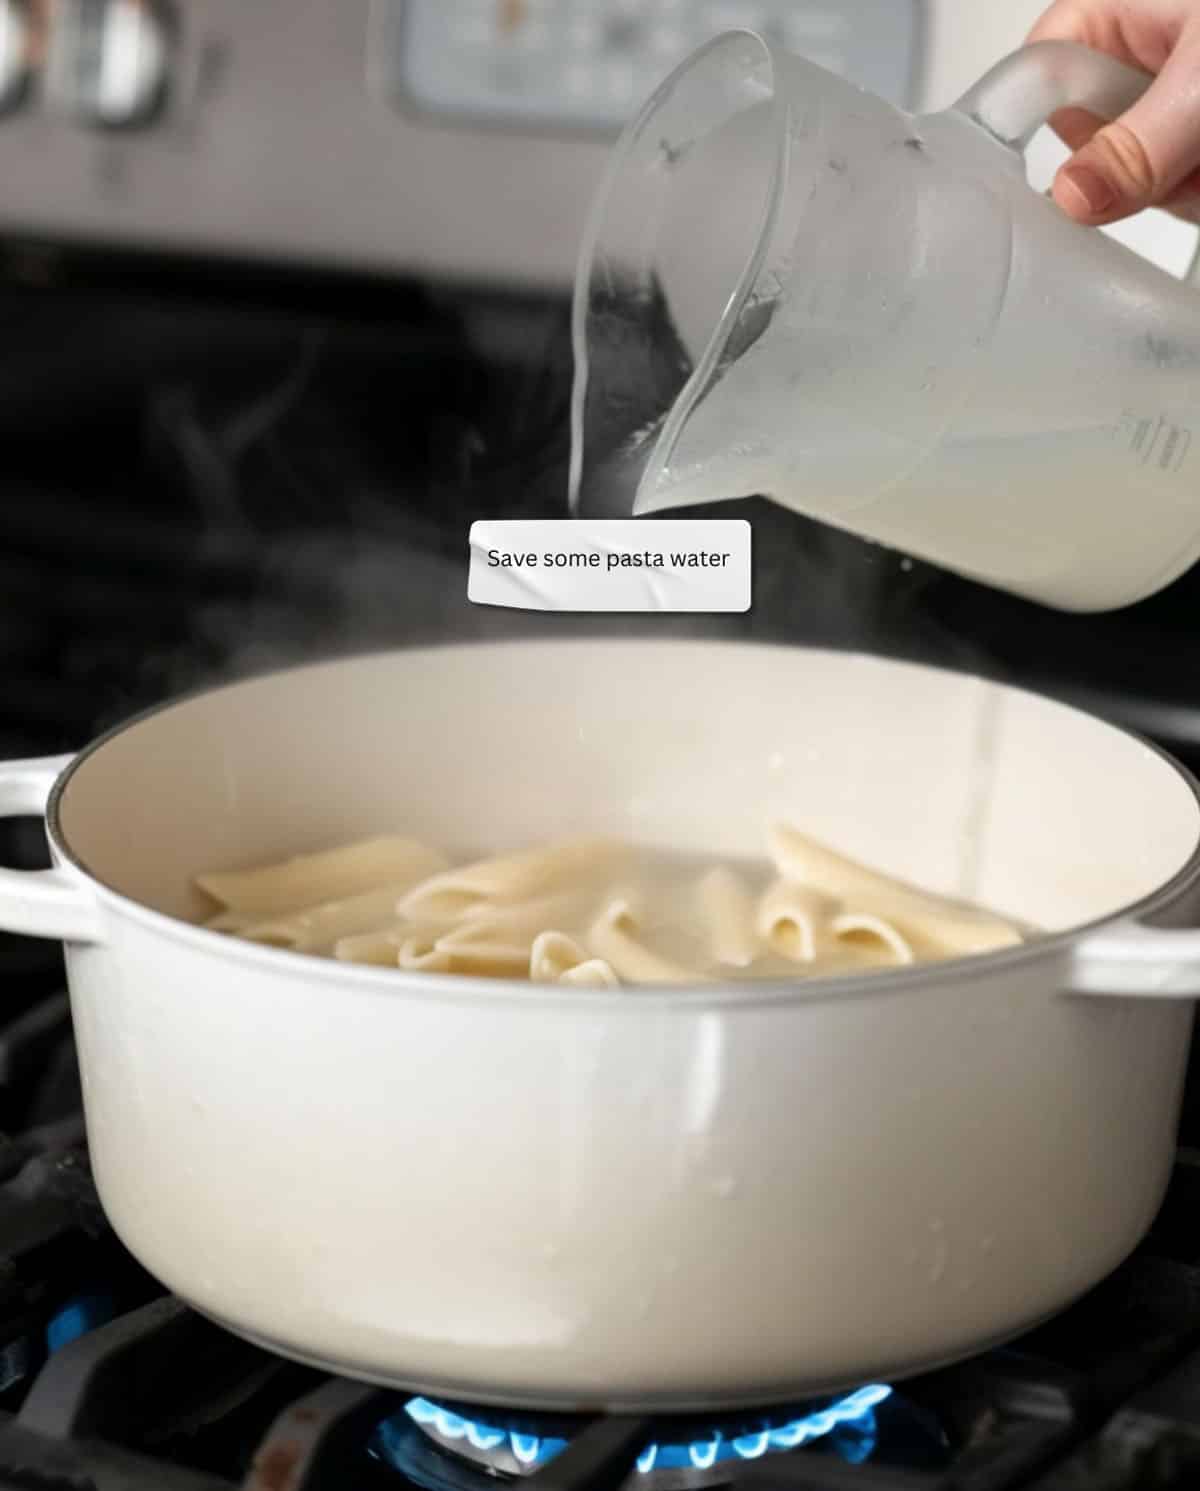 A jug scooping cloudy pasta water out of a pot, emphasizing its transformed state and sauce-enhancing properties.